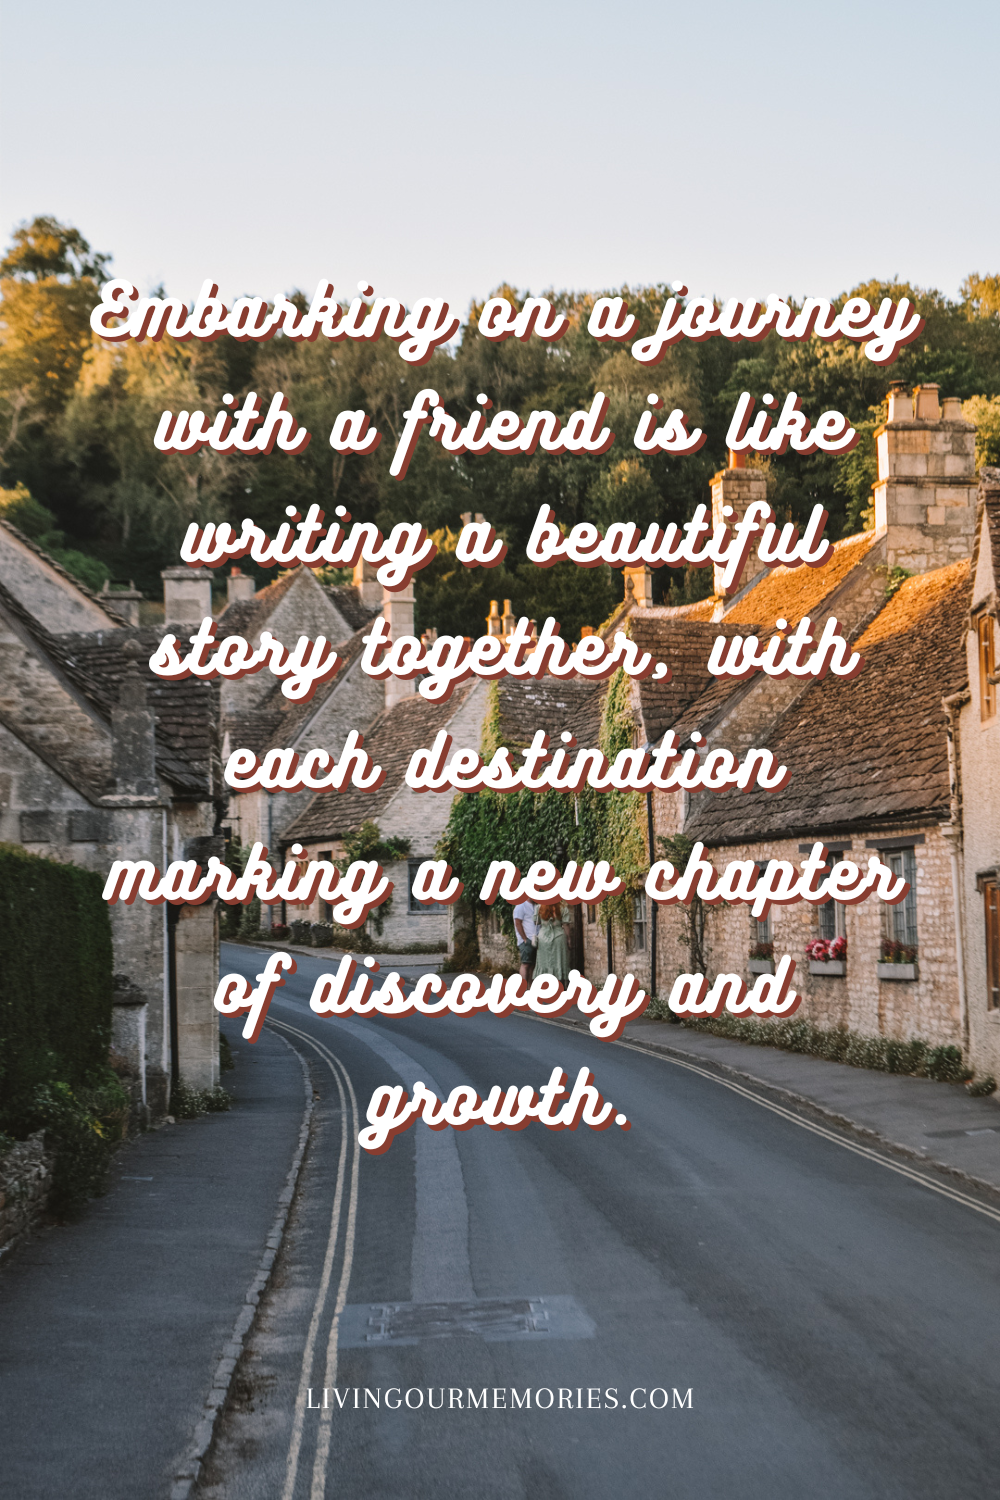 Embarking on a journey with a friend is like writing a beautiful story together, with each destination marking a new chapter of discovery and growth.